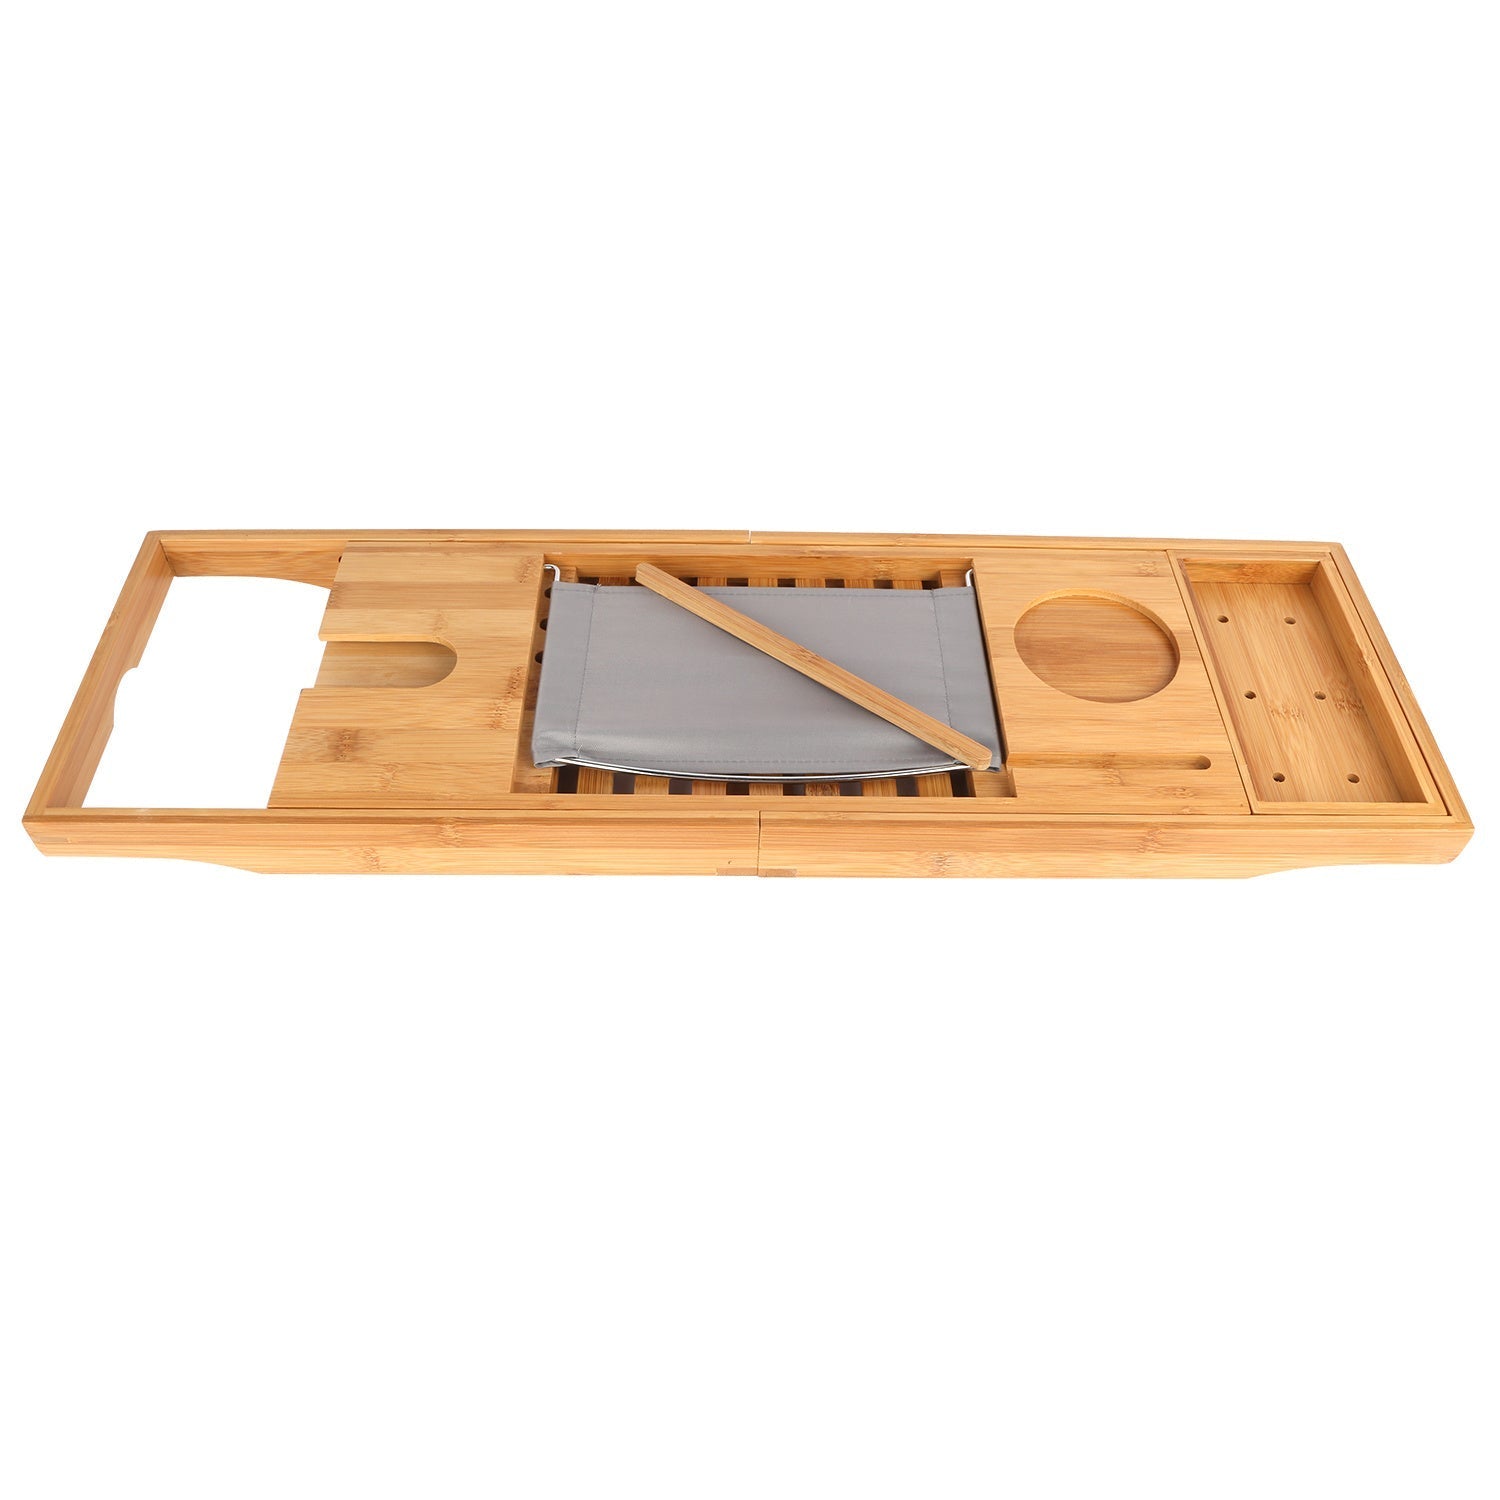 Bathtub Caddy Tray Crafted Bamboo Bath Tray Table Extendable Reading - ShopElegancyFurnitureBambooBathtub Caddy Tray Crafted Bamboo Bath Tray Table Extendable Reading